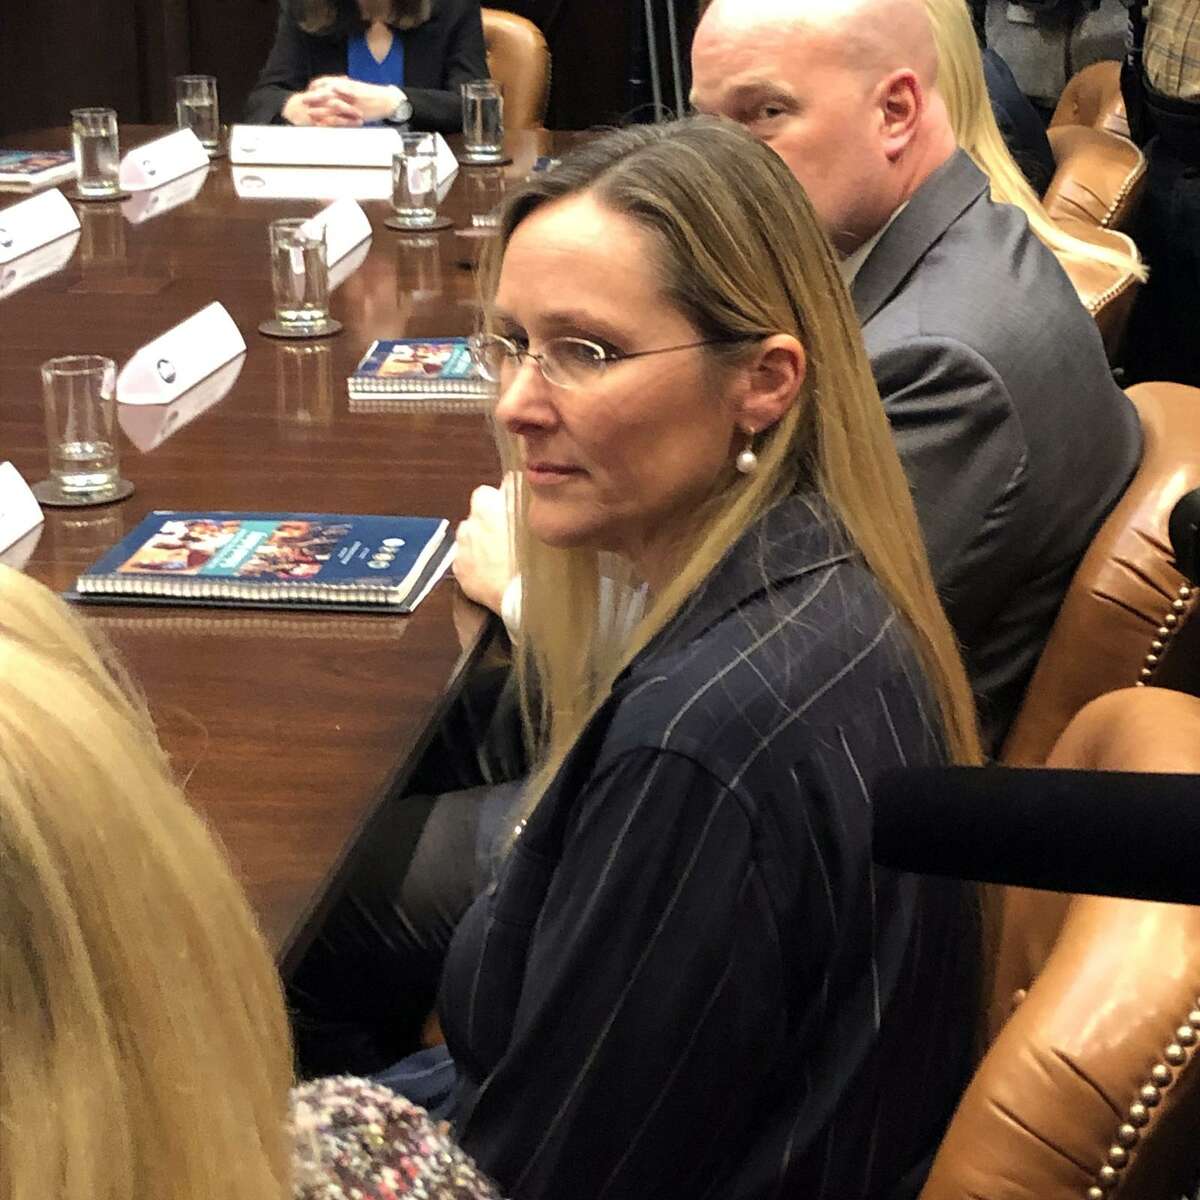 Scarlett Lewis, who lost her son Jesse at Sandy Hook, attends a round table White House meeting on school safety with a President Trump at the White House on Tuesday, Dec. 18, 2018.